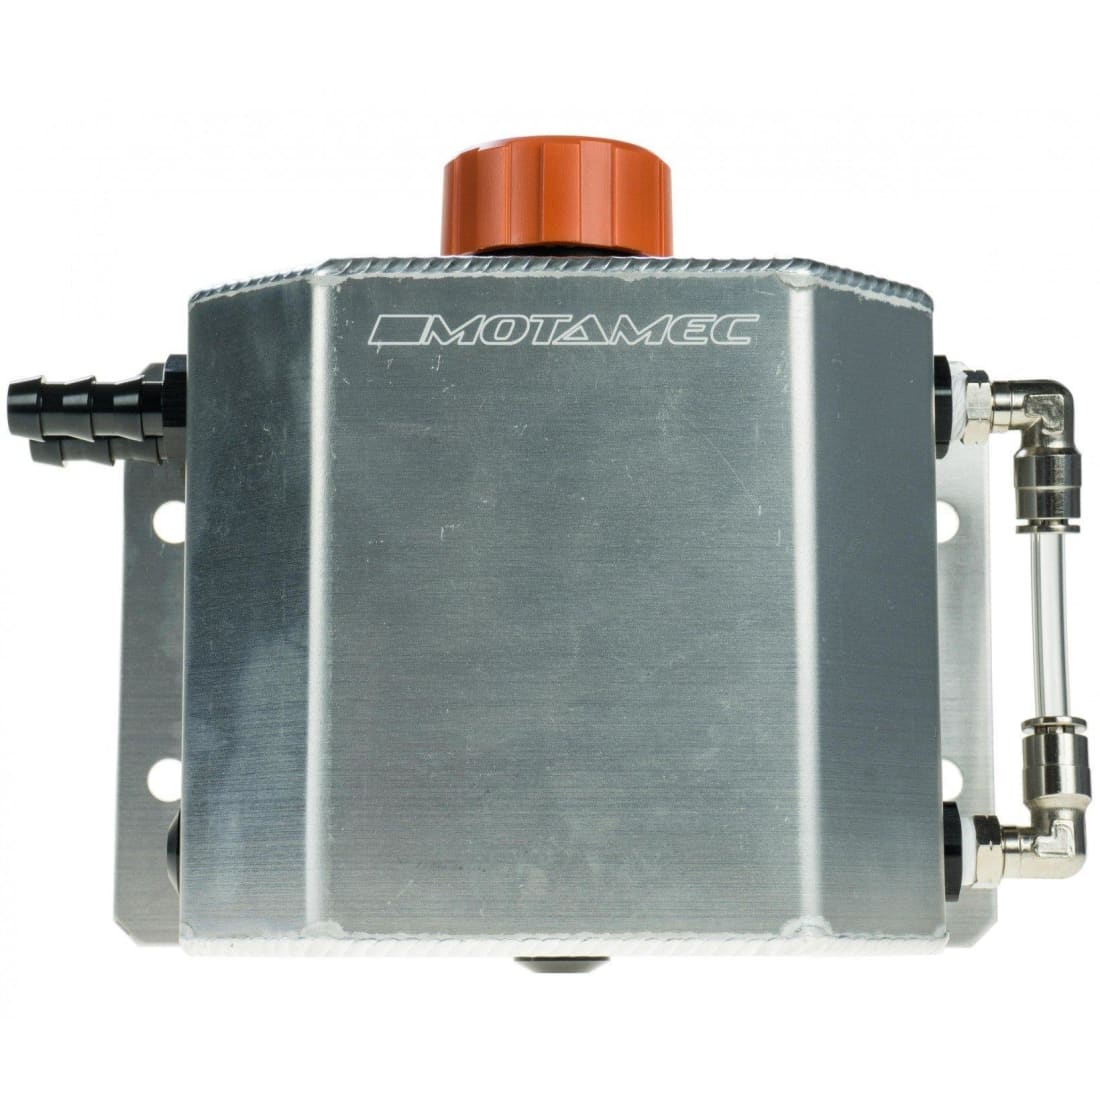 1 litre alloy catch tank with breather cap